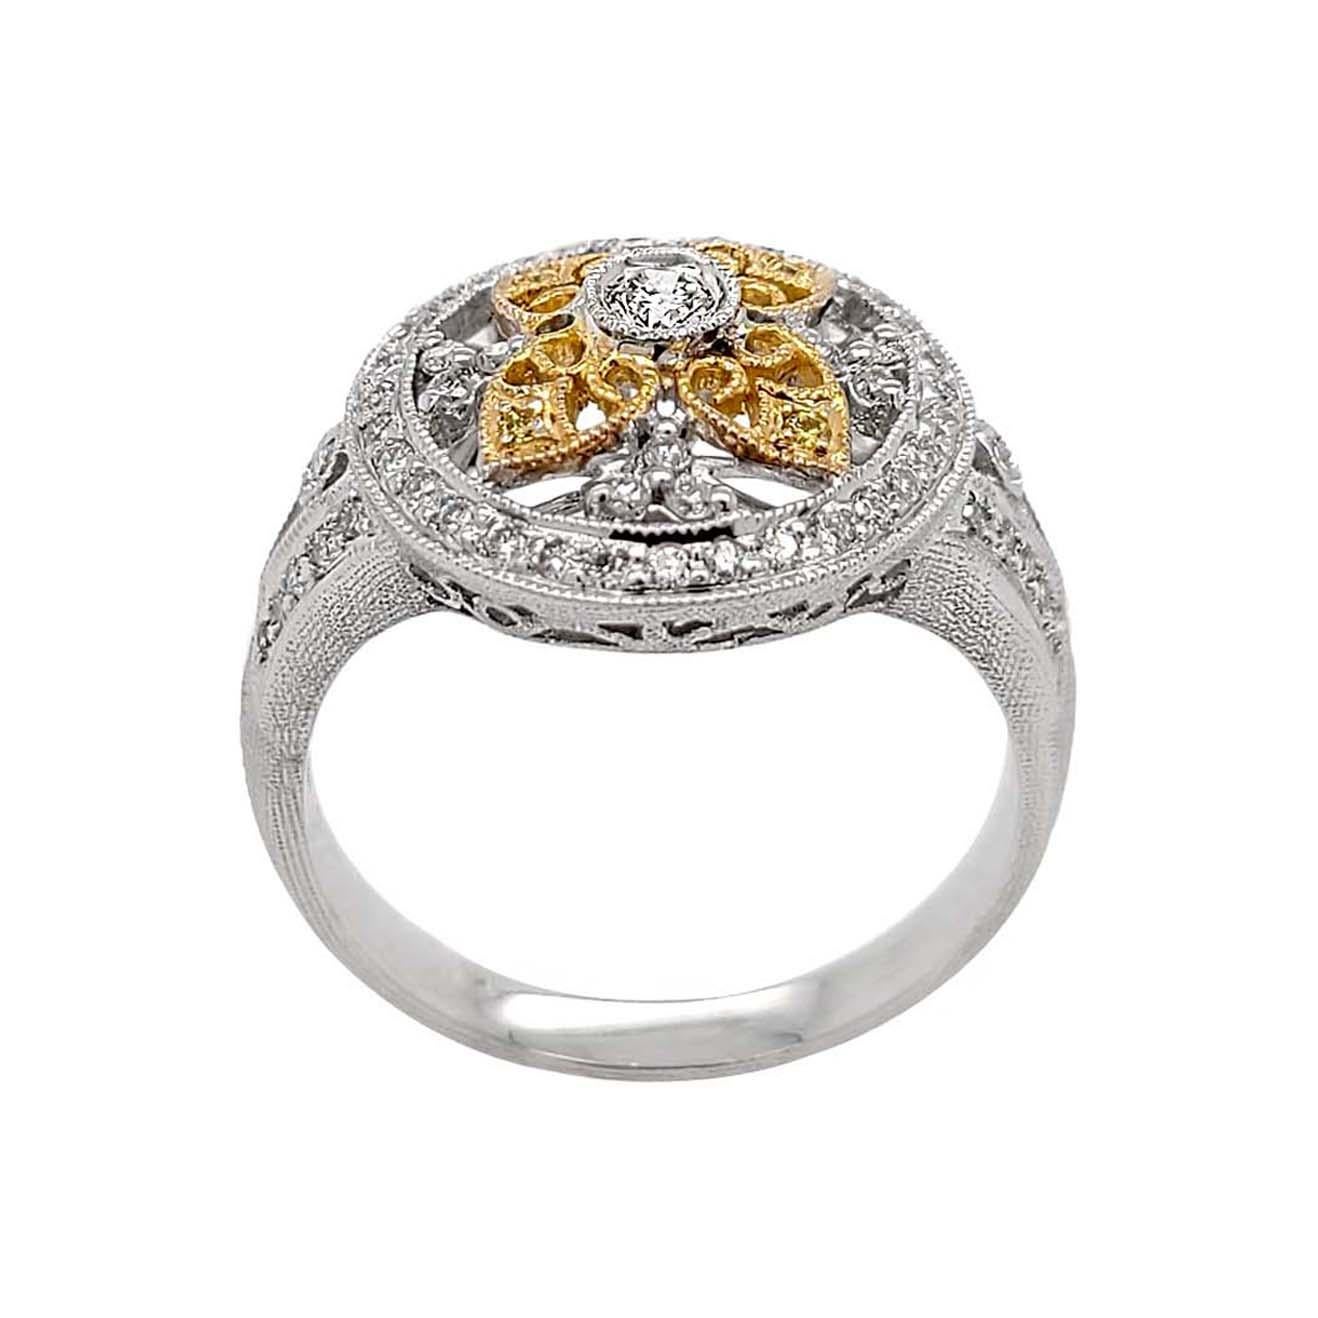 Produced by award winning Italian designer Stefano Vitolo,. Stefano creates custom artisanal one of a kind jewelry with excellent gemstones in a truly old world Italian craftmanship.
This handcrafted ring has 0.59 carat total weight of F/G color  VS